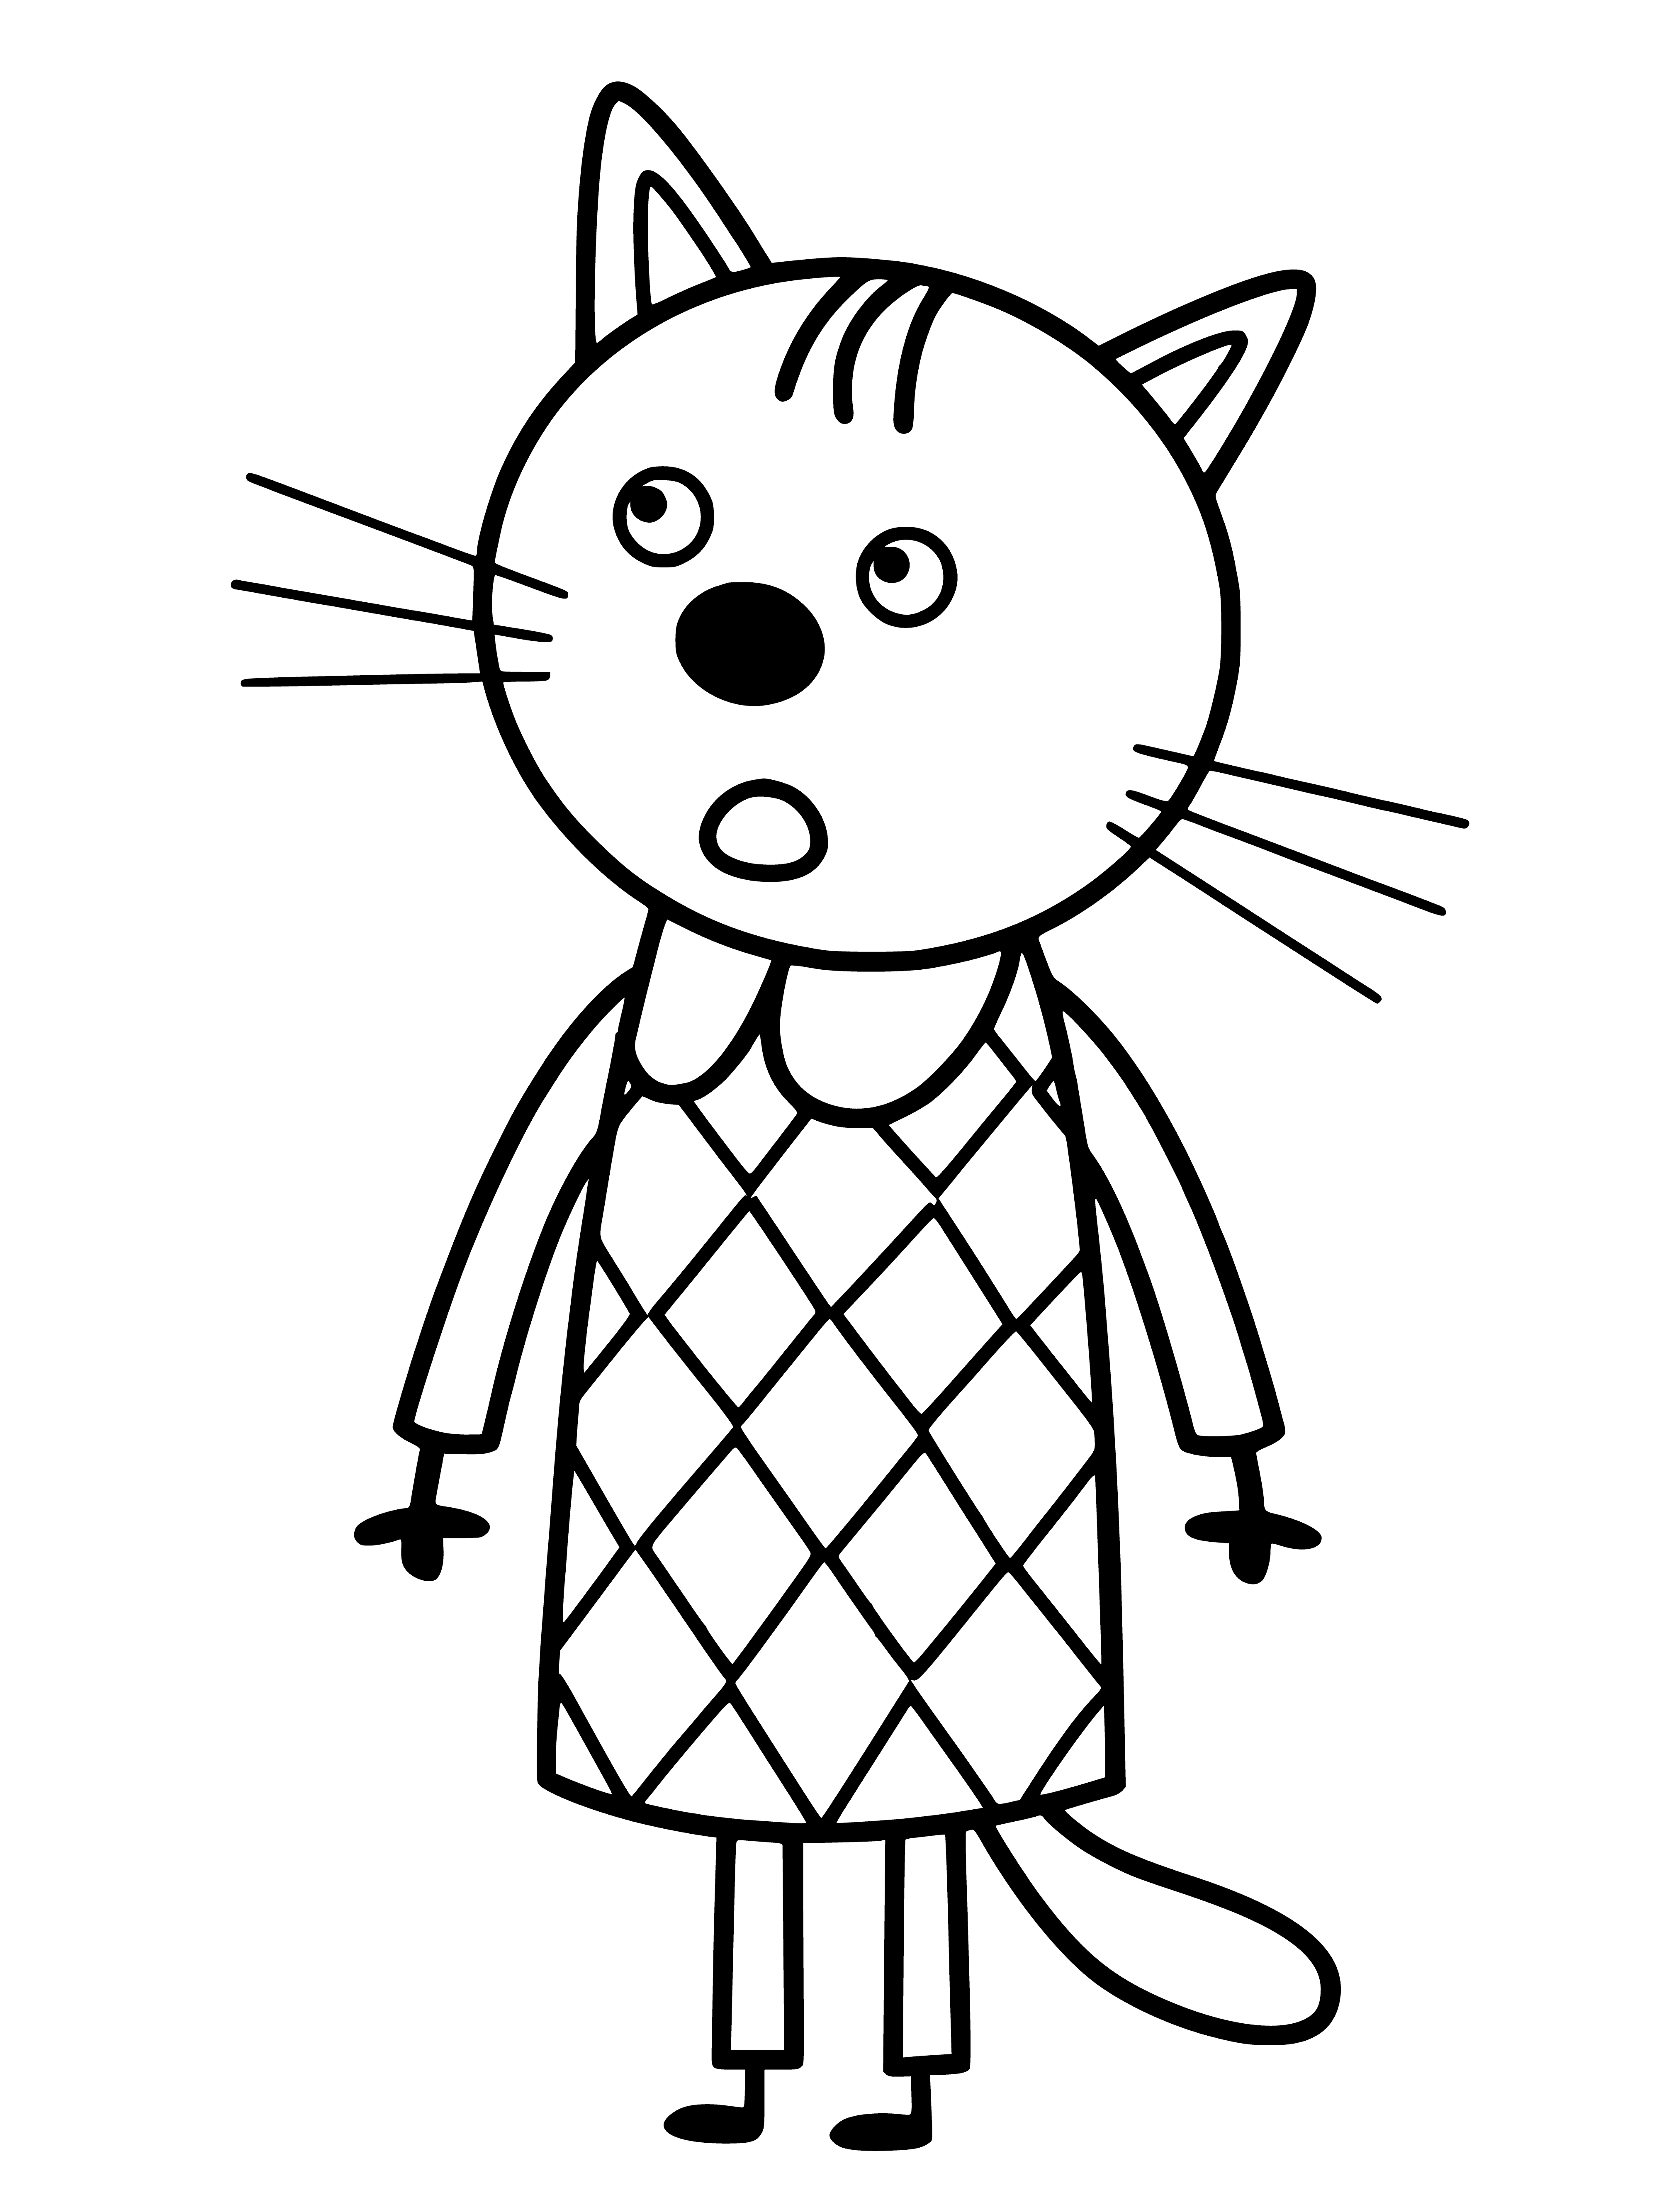 coloring page: 3 cats, 2 standing/1 sitting, with tongues sticking out make up Nudik. #coloringpages #cats